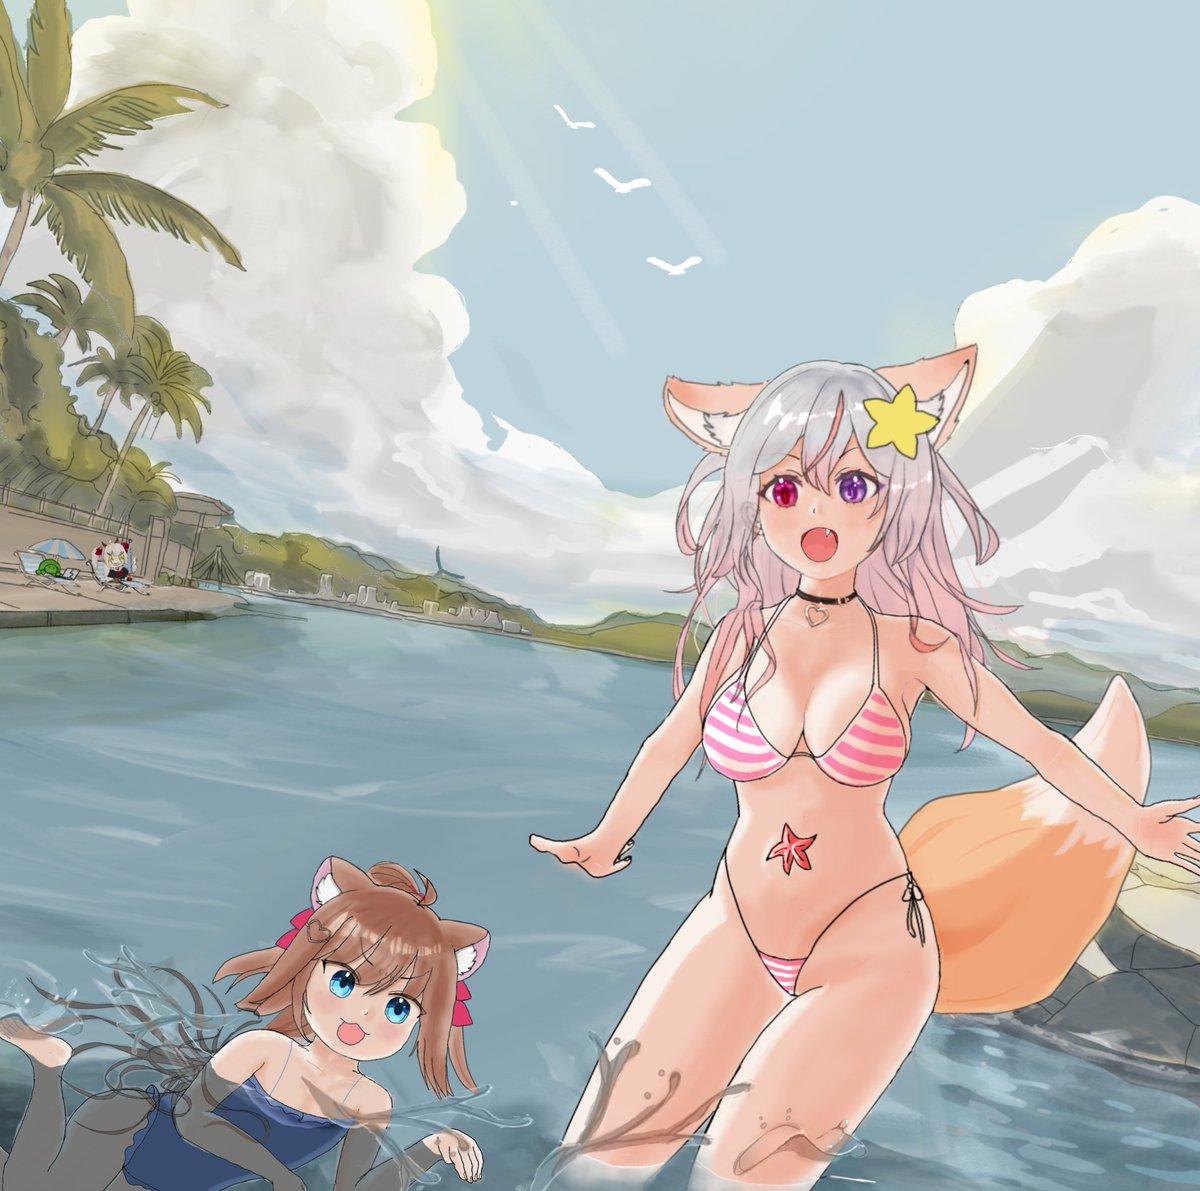 Big mother and family swimming tour.
Full family party!
Hoping Anny well and get a family reunion soon~~.
#Heartheartart #annytfart
#neurosama